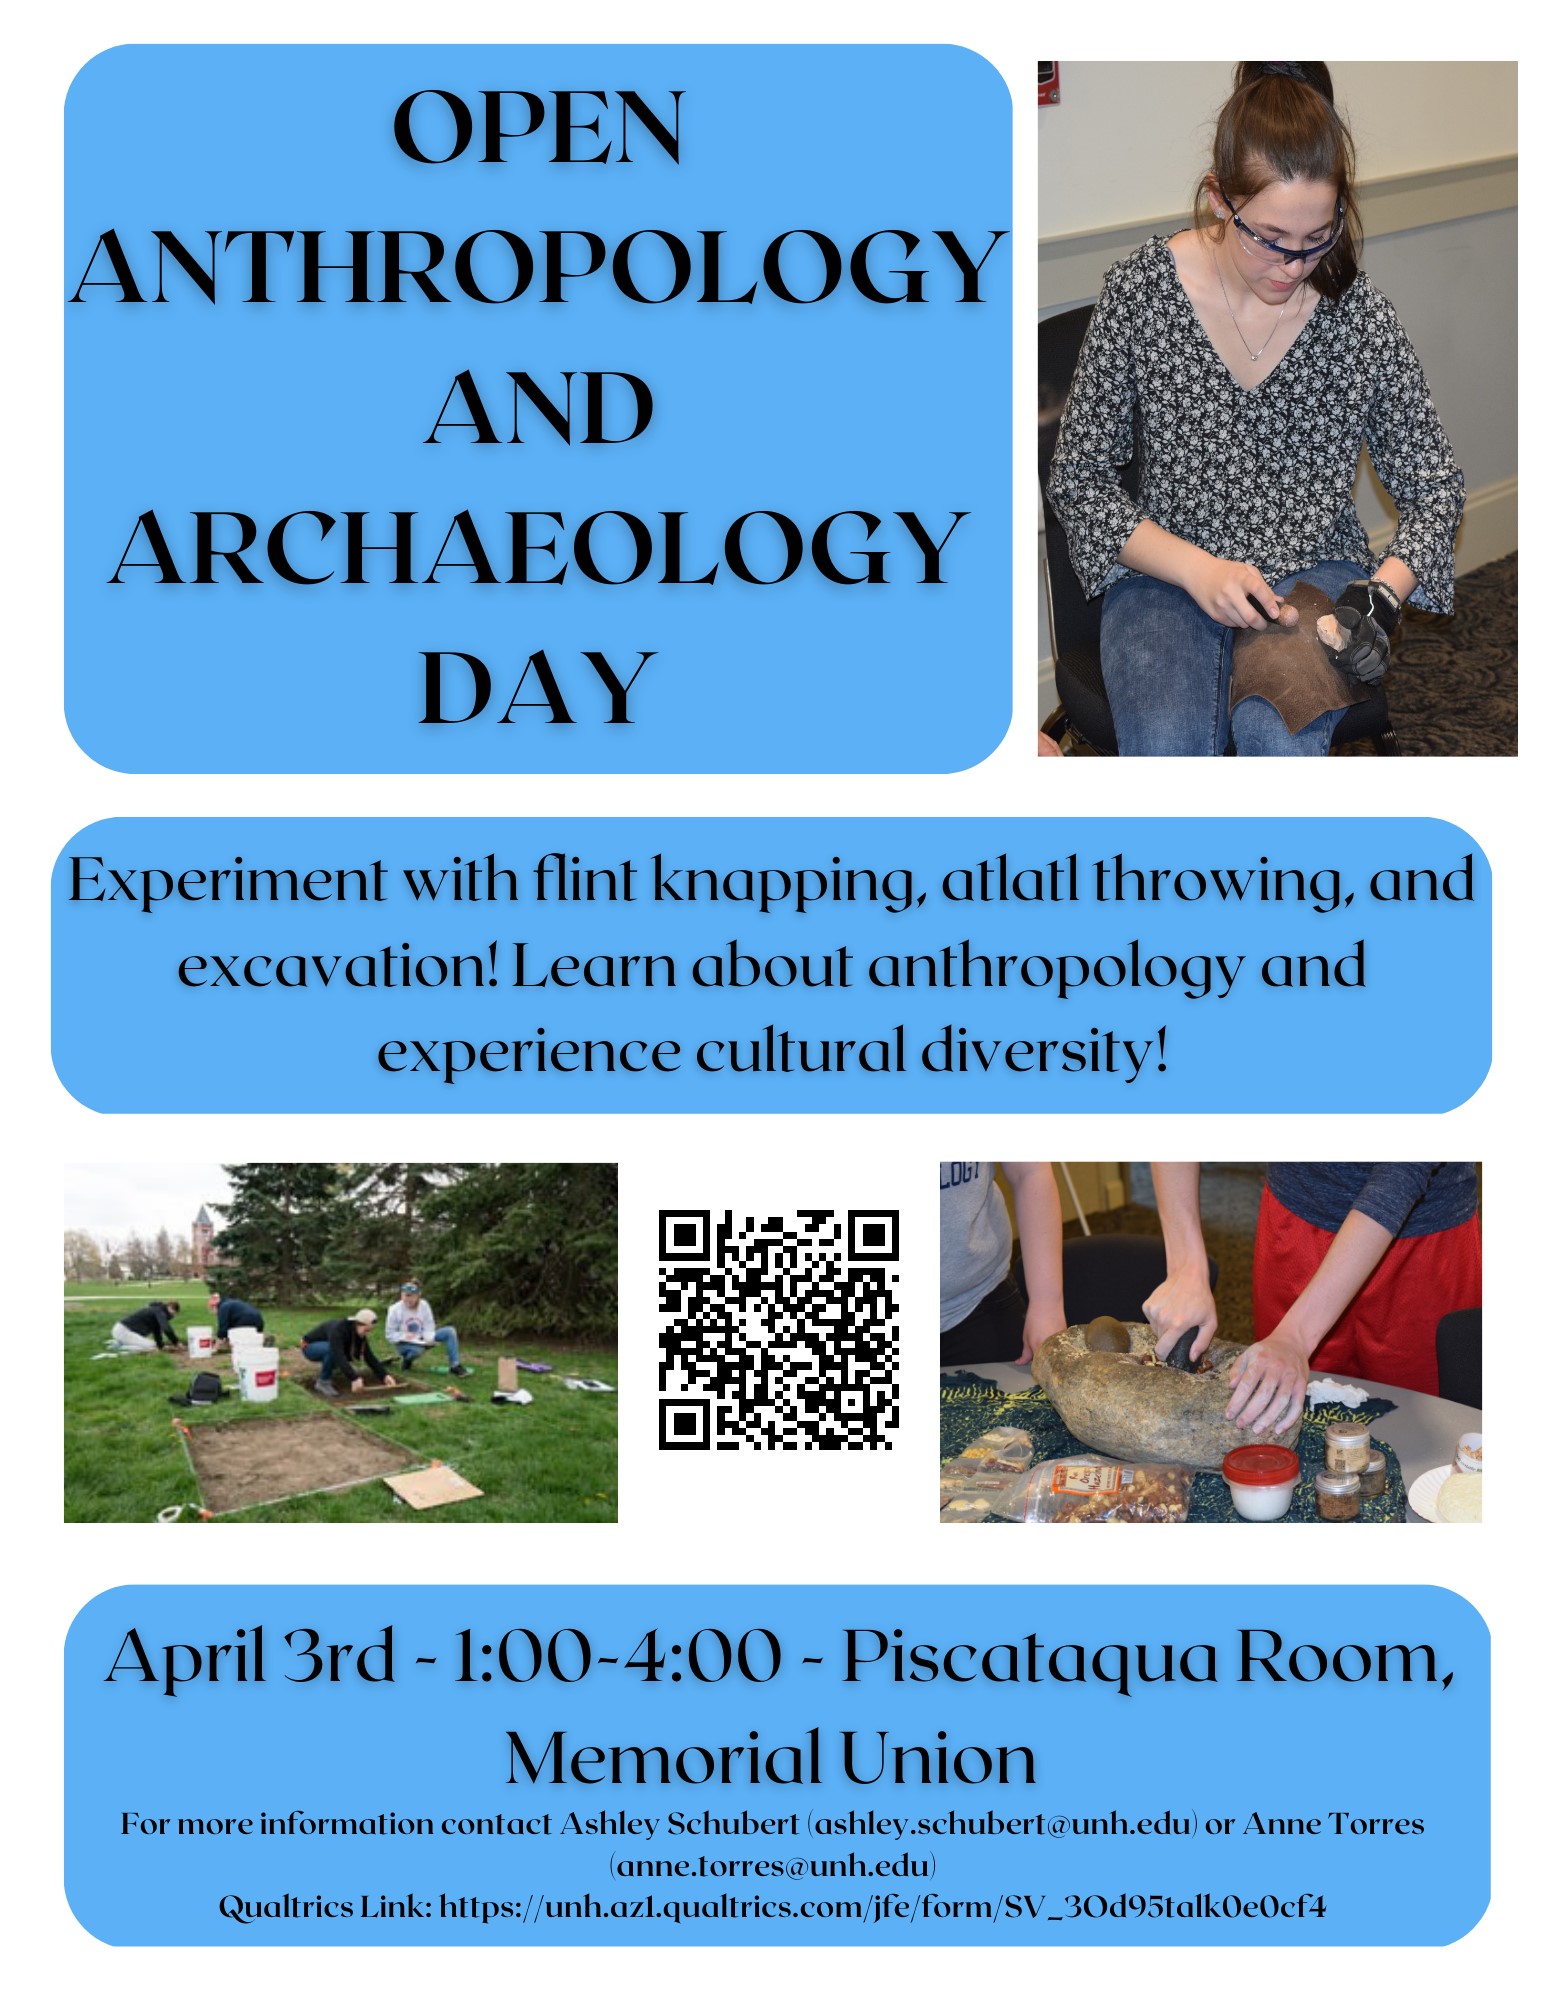 Open Anthropology and Archaeology Day image.